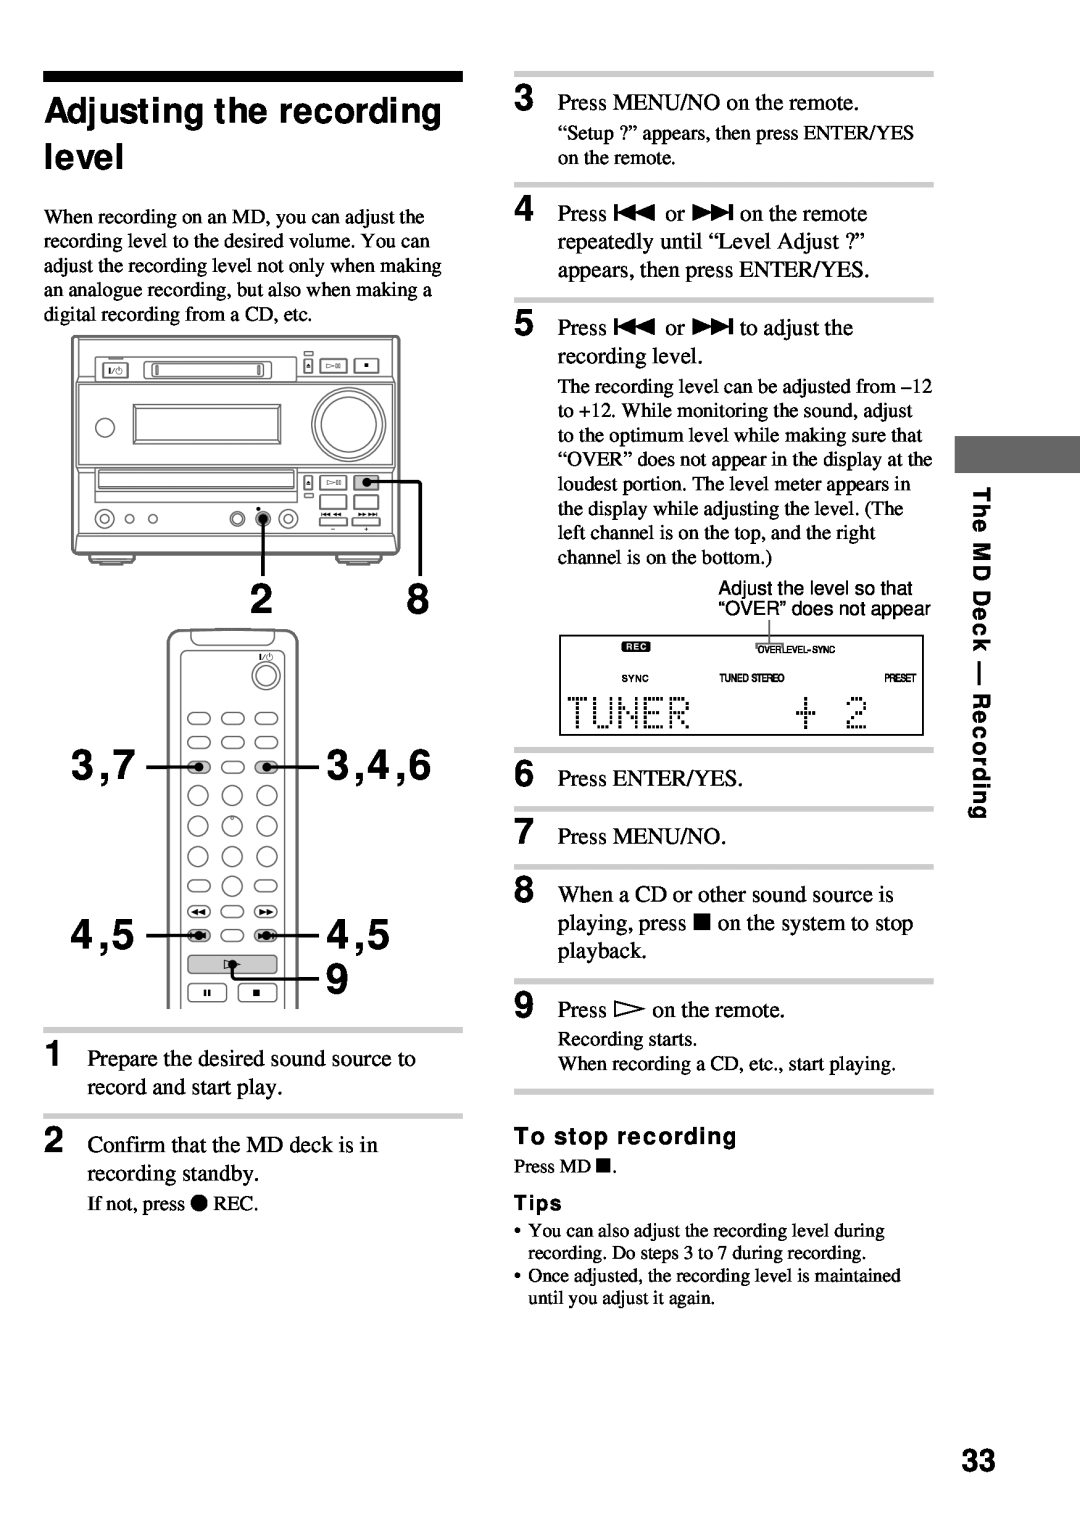 Sony DHC-MD373 Adjusting the recording level, 3,7 3,4,6, Press . or to adjust the recording level, Press H on the remote 